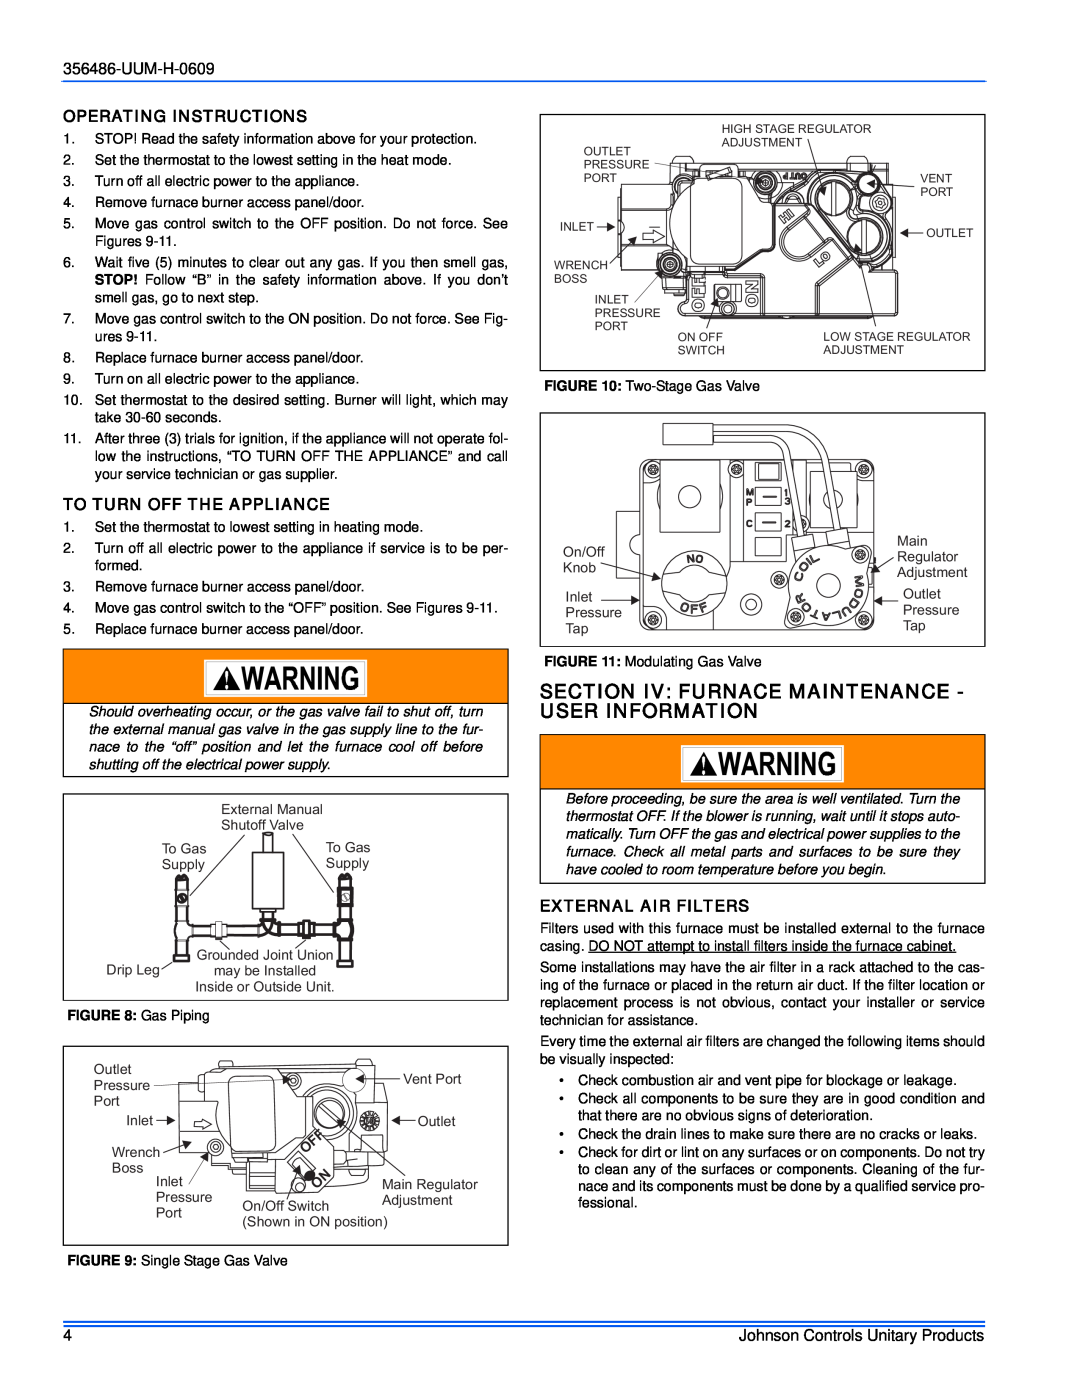 Johnson Controls 356486-UUM-H-0609 Operating Instructions, To Turn Off The Appliance, External Air Filters, Gas Piping 